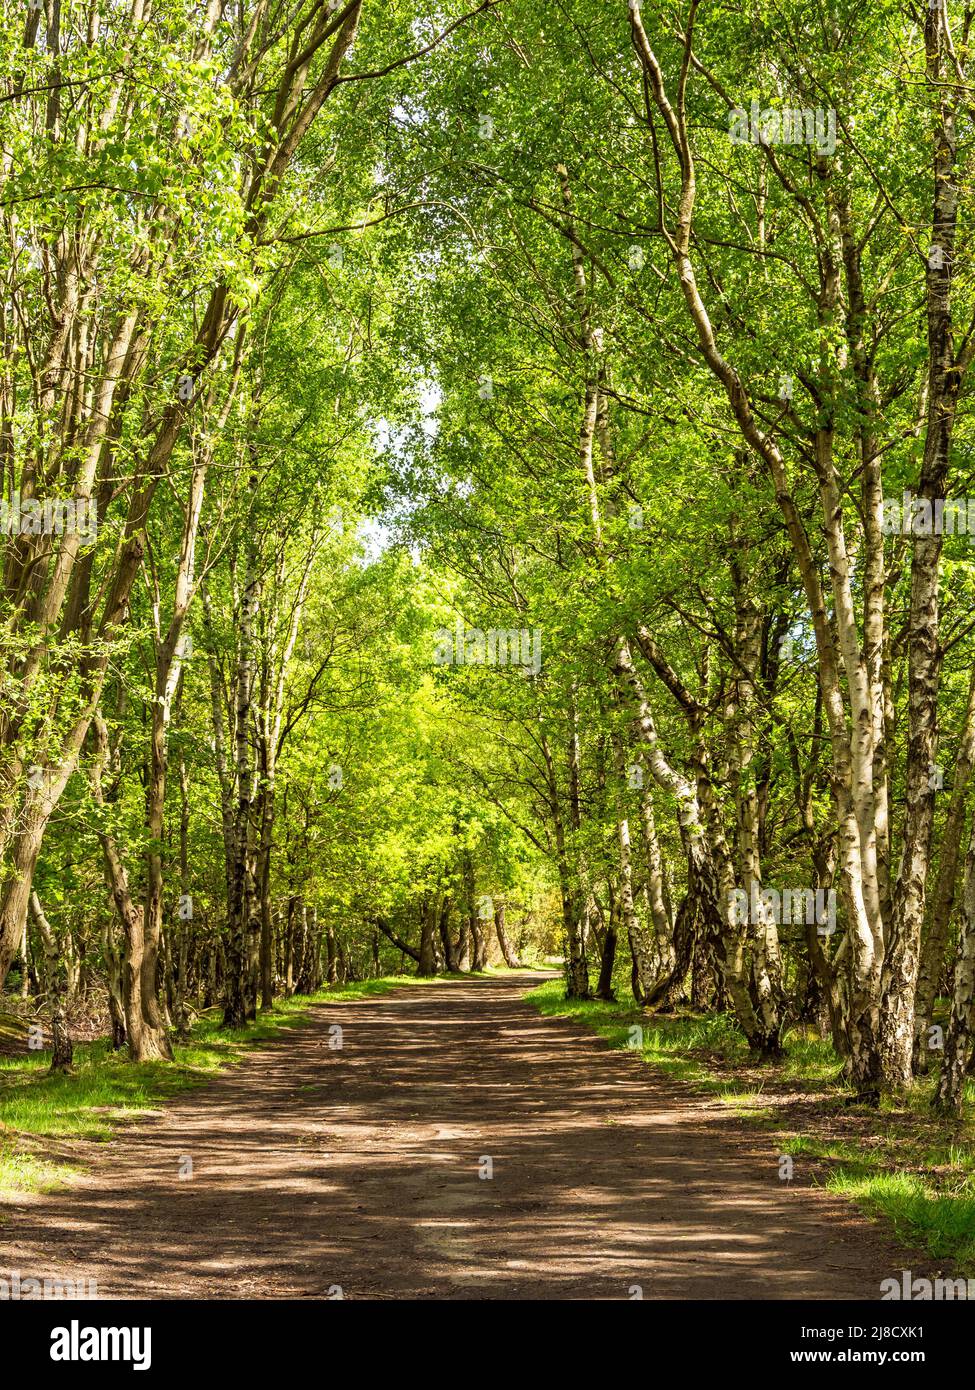 Lane lined by tall silver birch trees in dappled sunlight Stock Photo